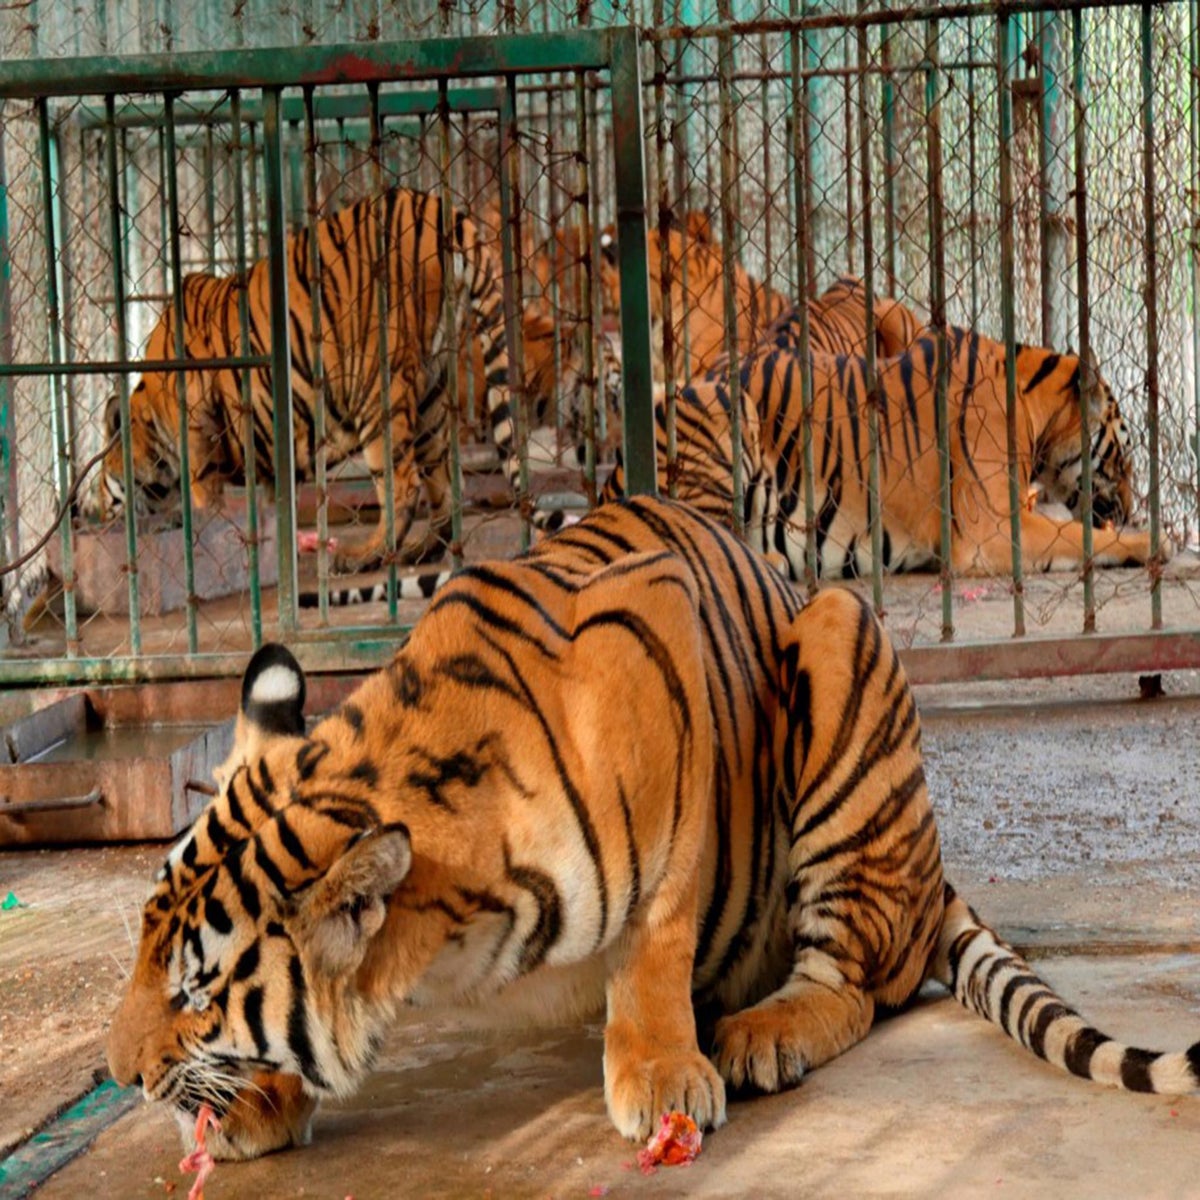 Tiger cubs bred in captivity and then FROZEN so they can be sold to make  GLUE